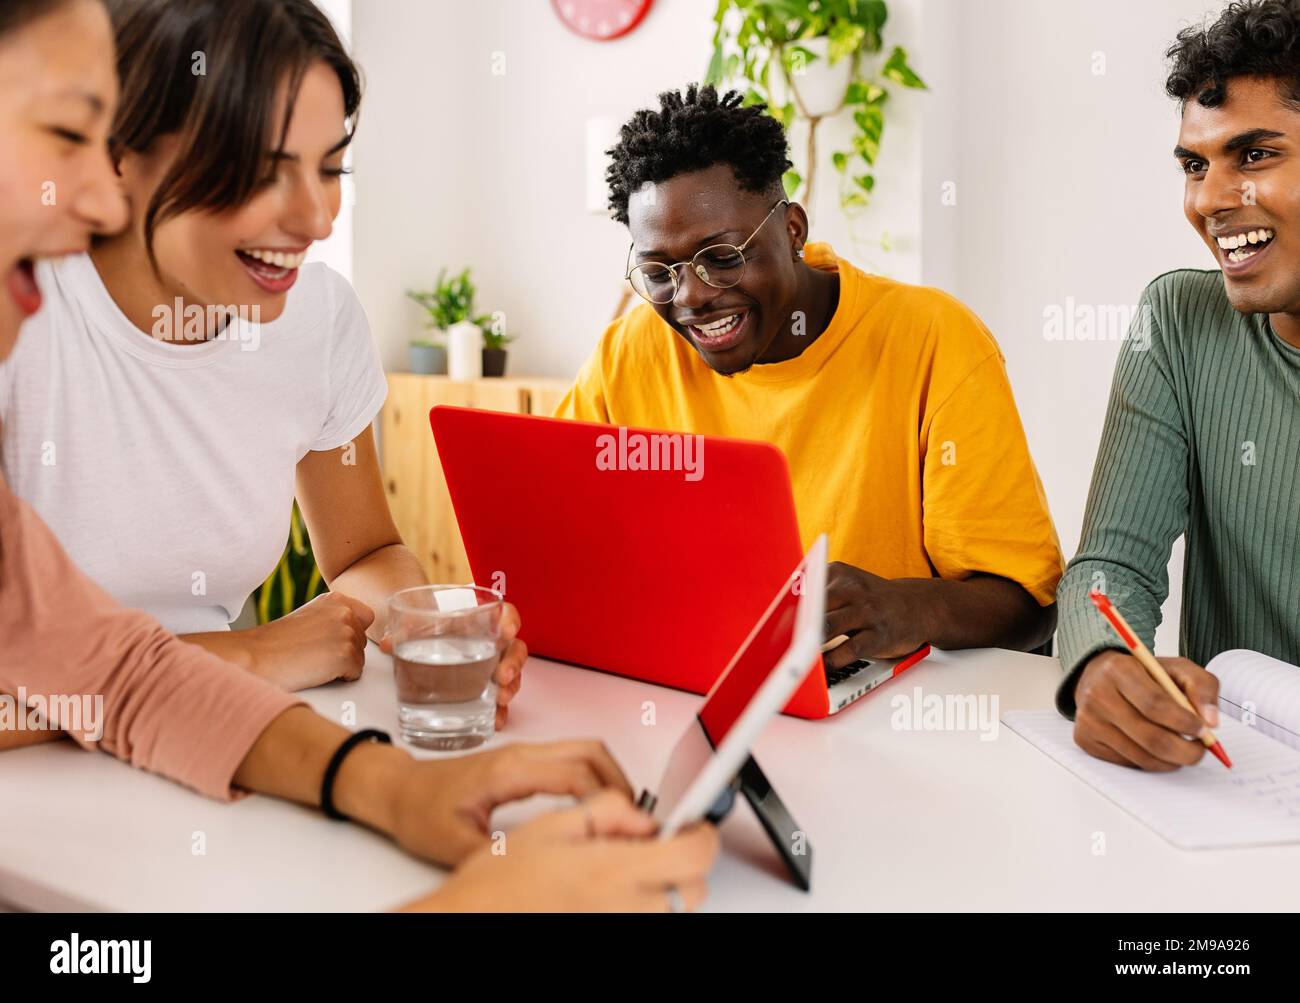 Young group of university students working together using laptop at home Stock Photo